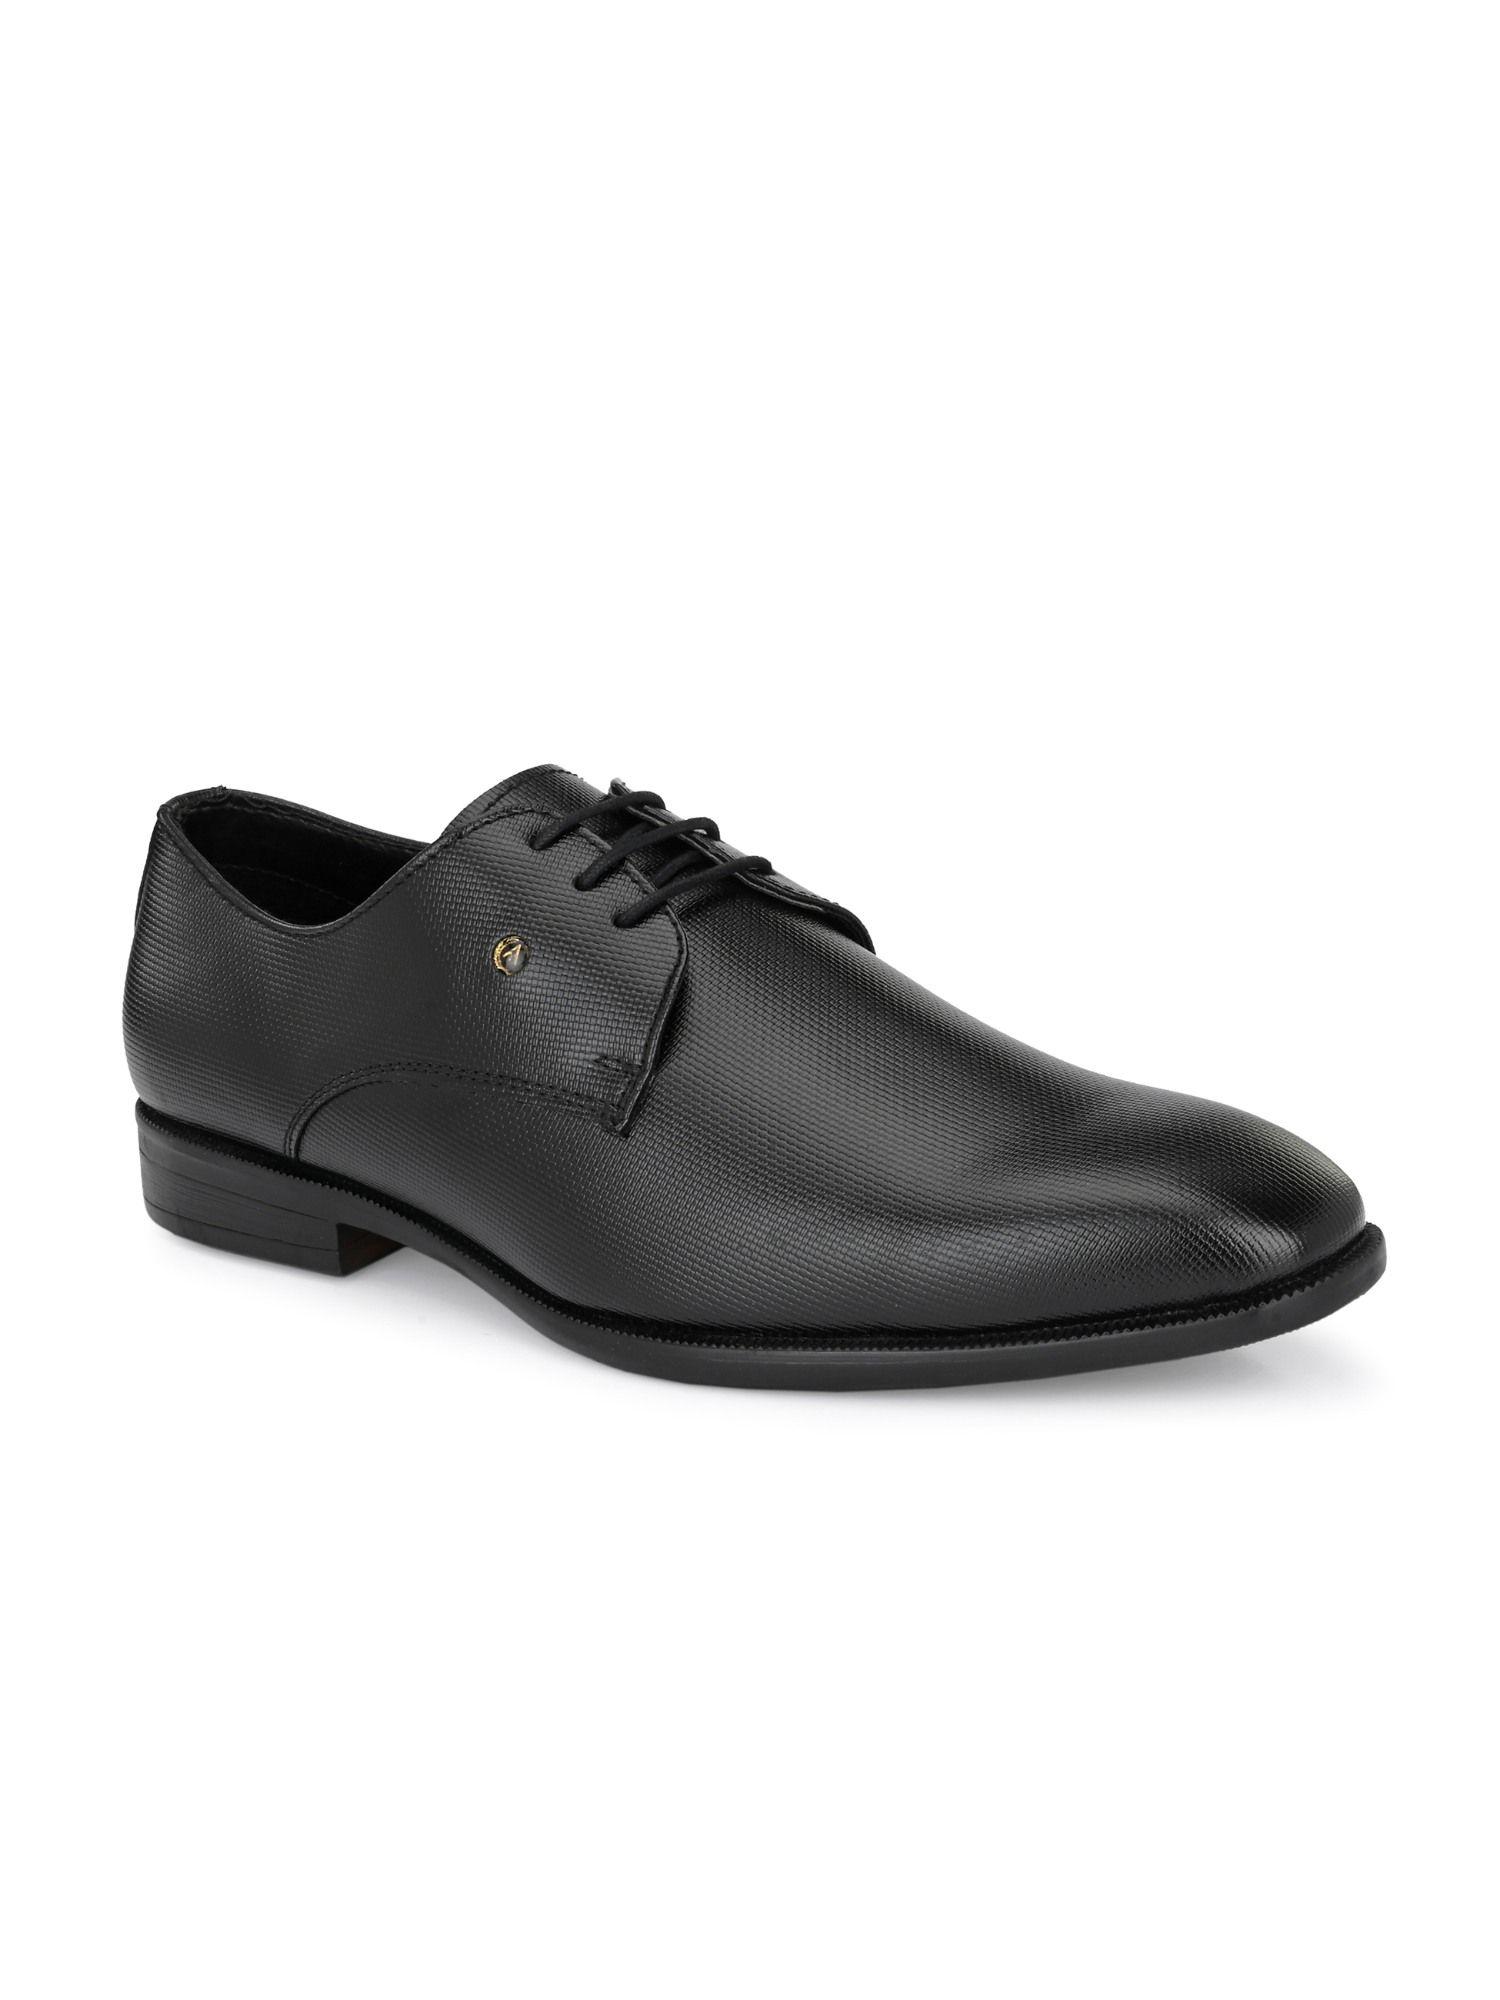 Textured Synthetic Black Lace Up Formal Shoes for Men